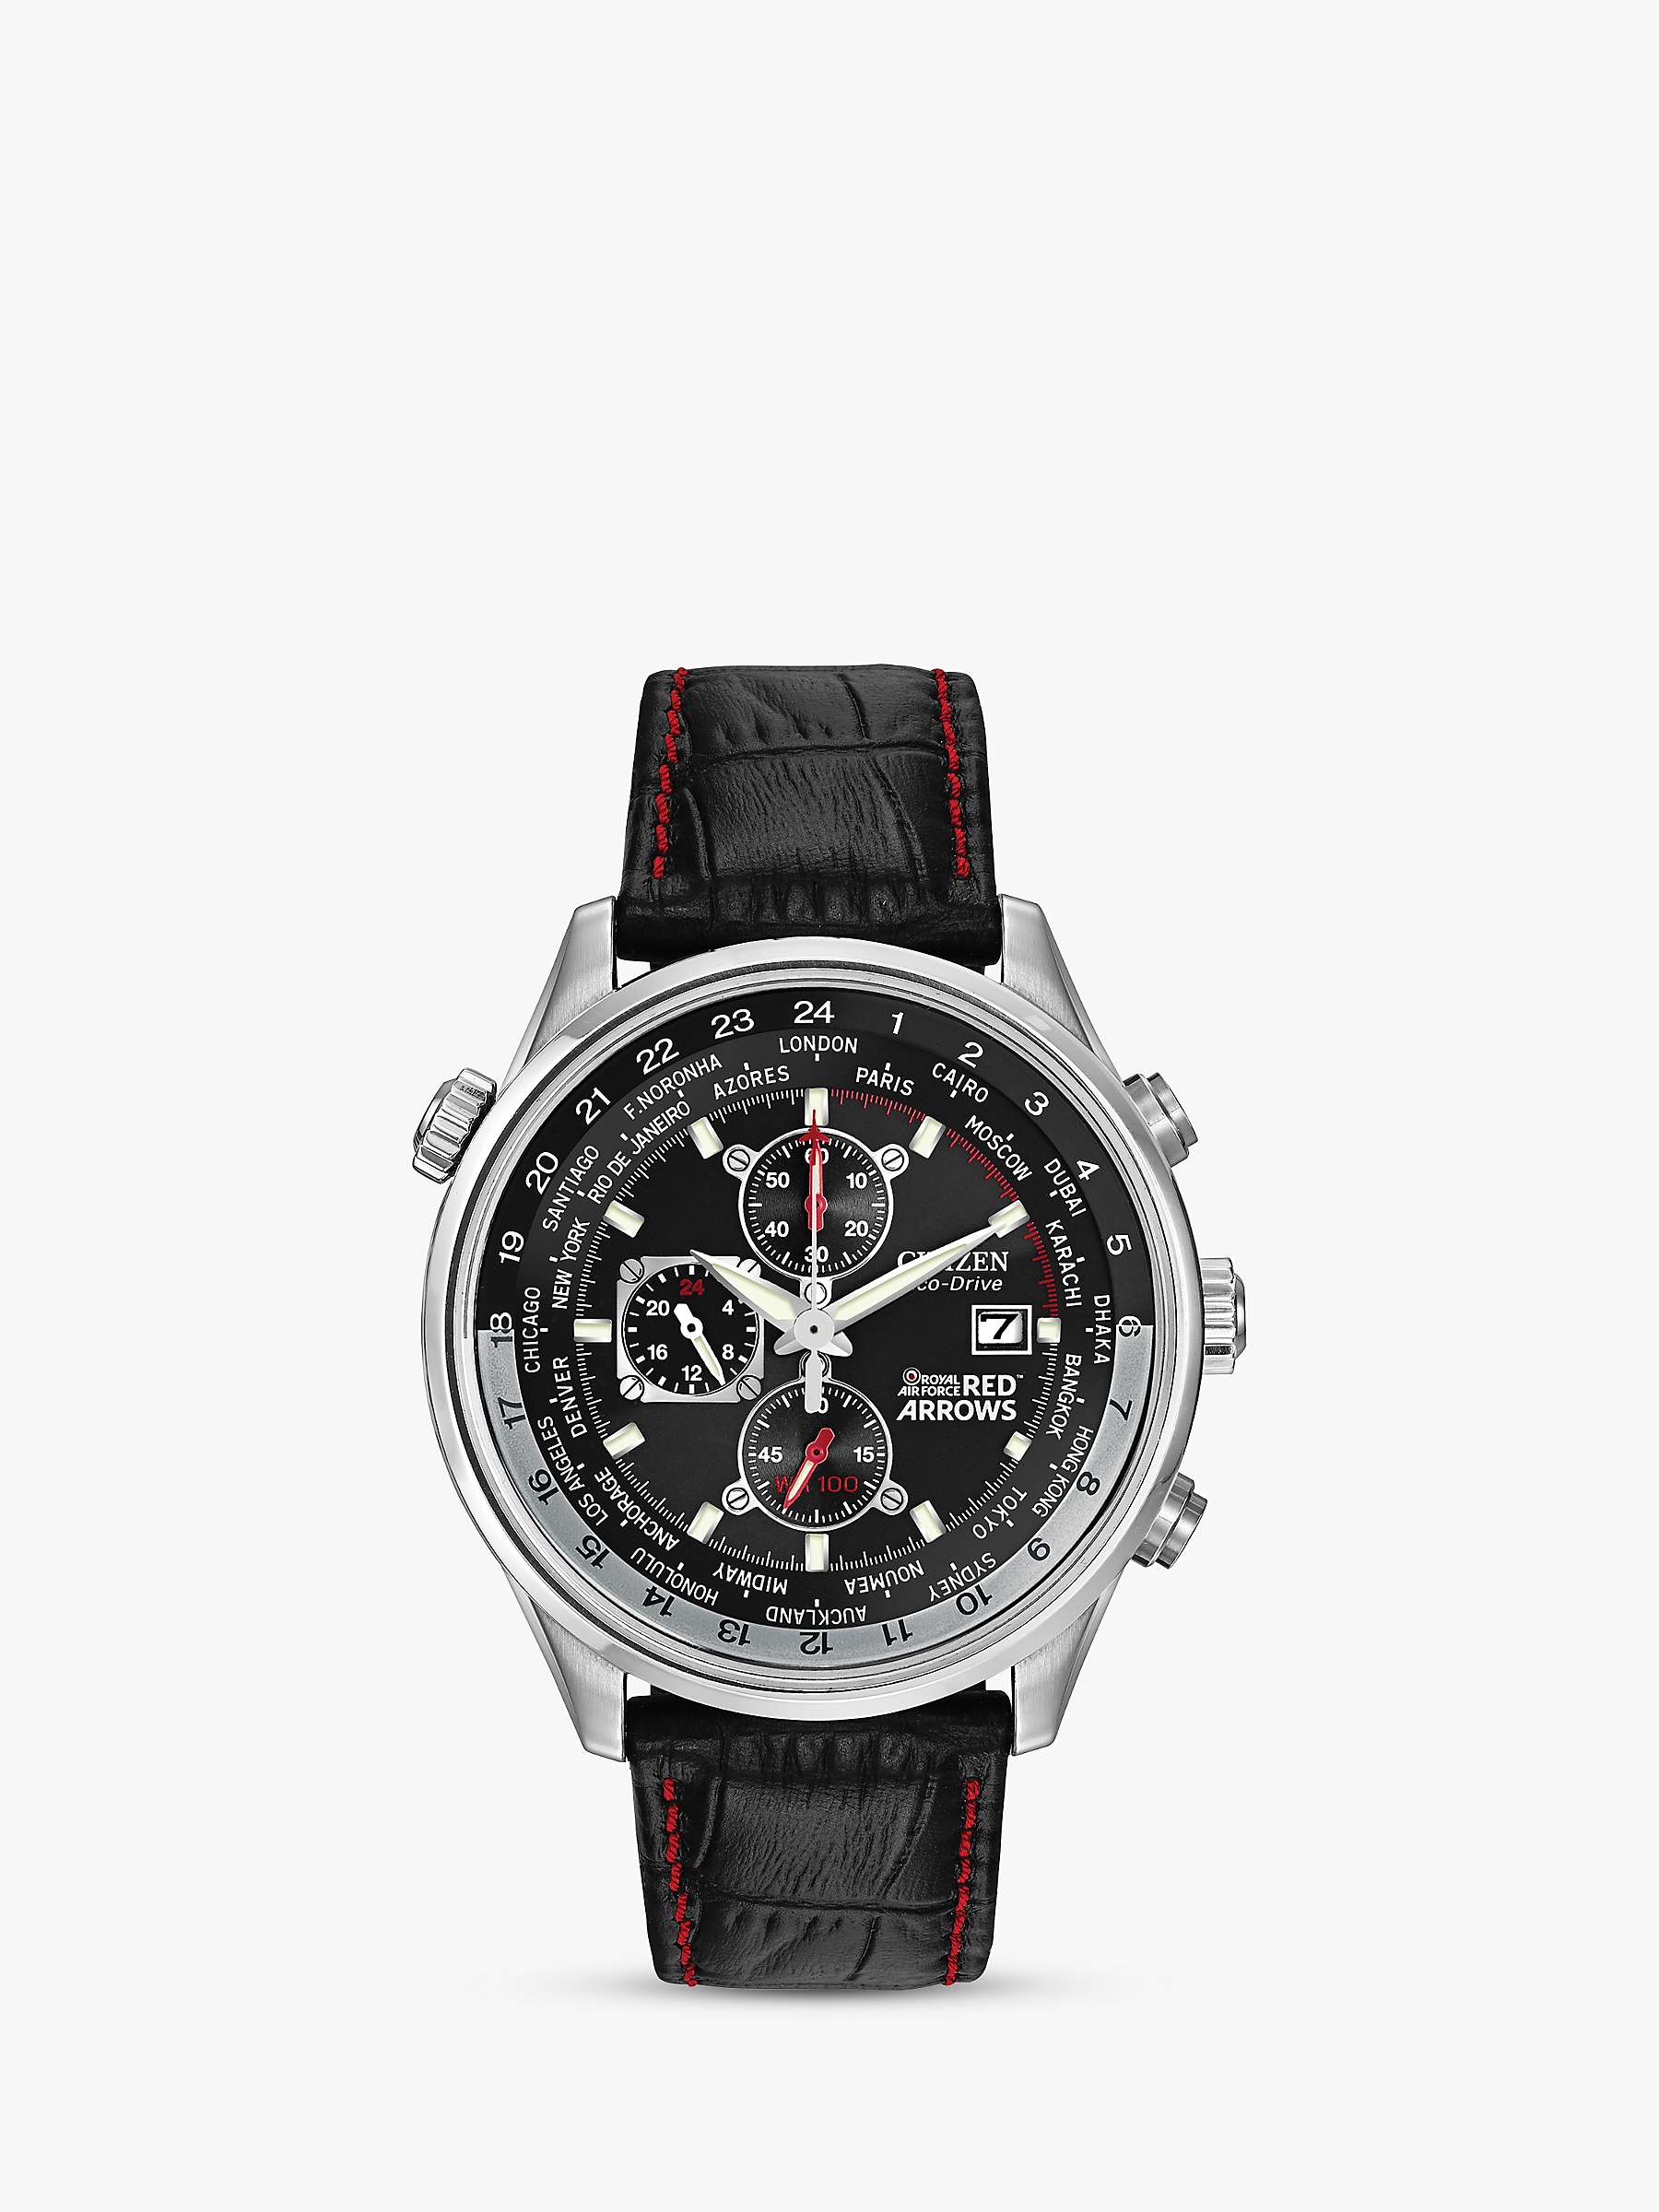 Citizen CA0080-03E Men's Red Arrows Eco-Drive Chronograph Leather Strap  Watch, Black at John Lewis & Partners